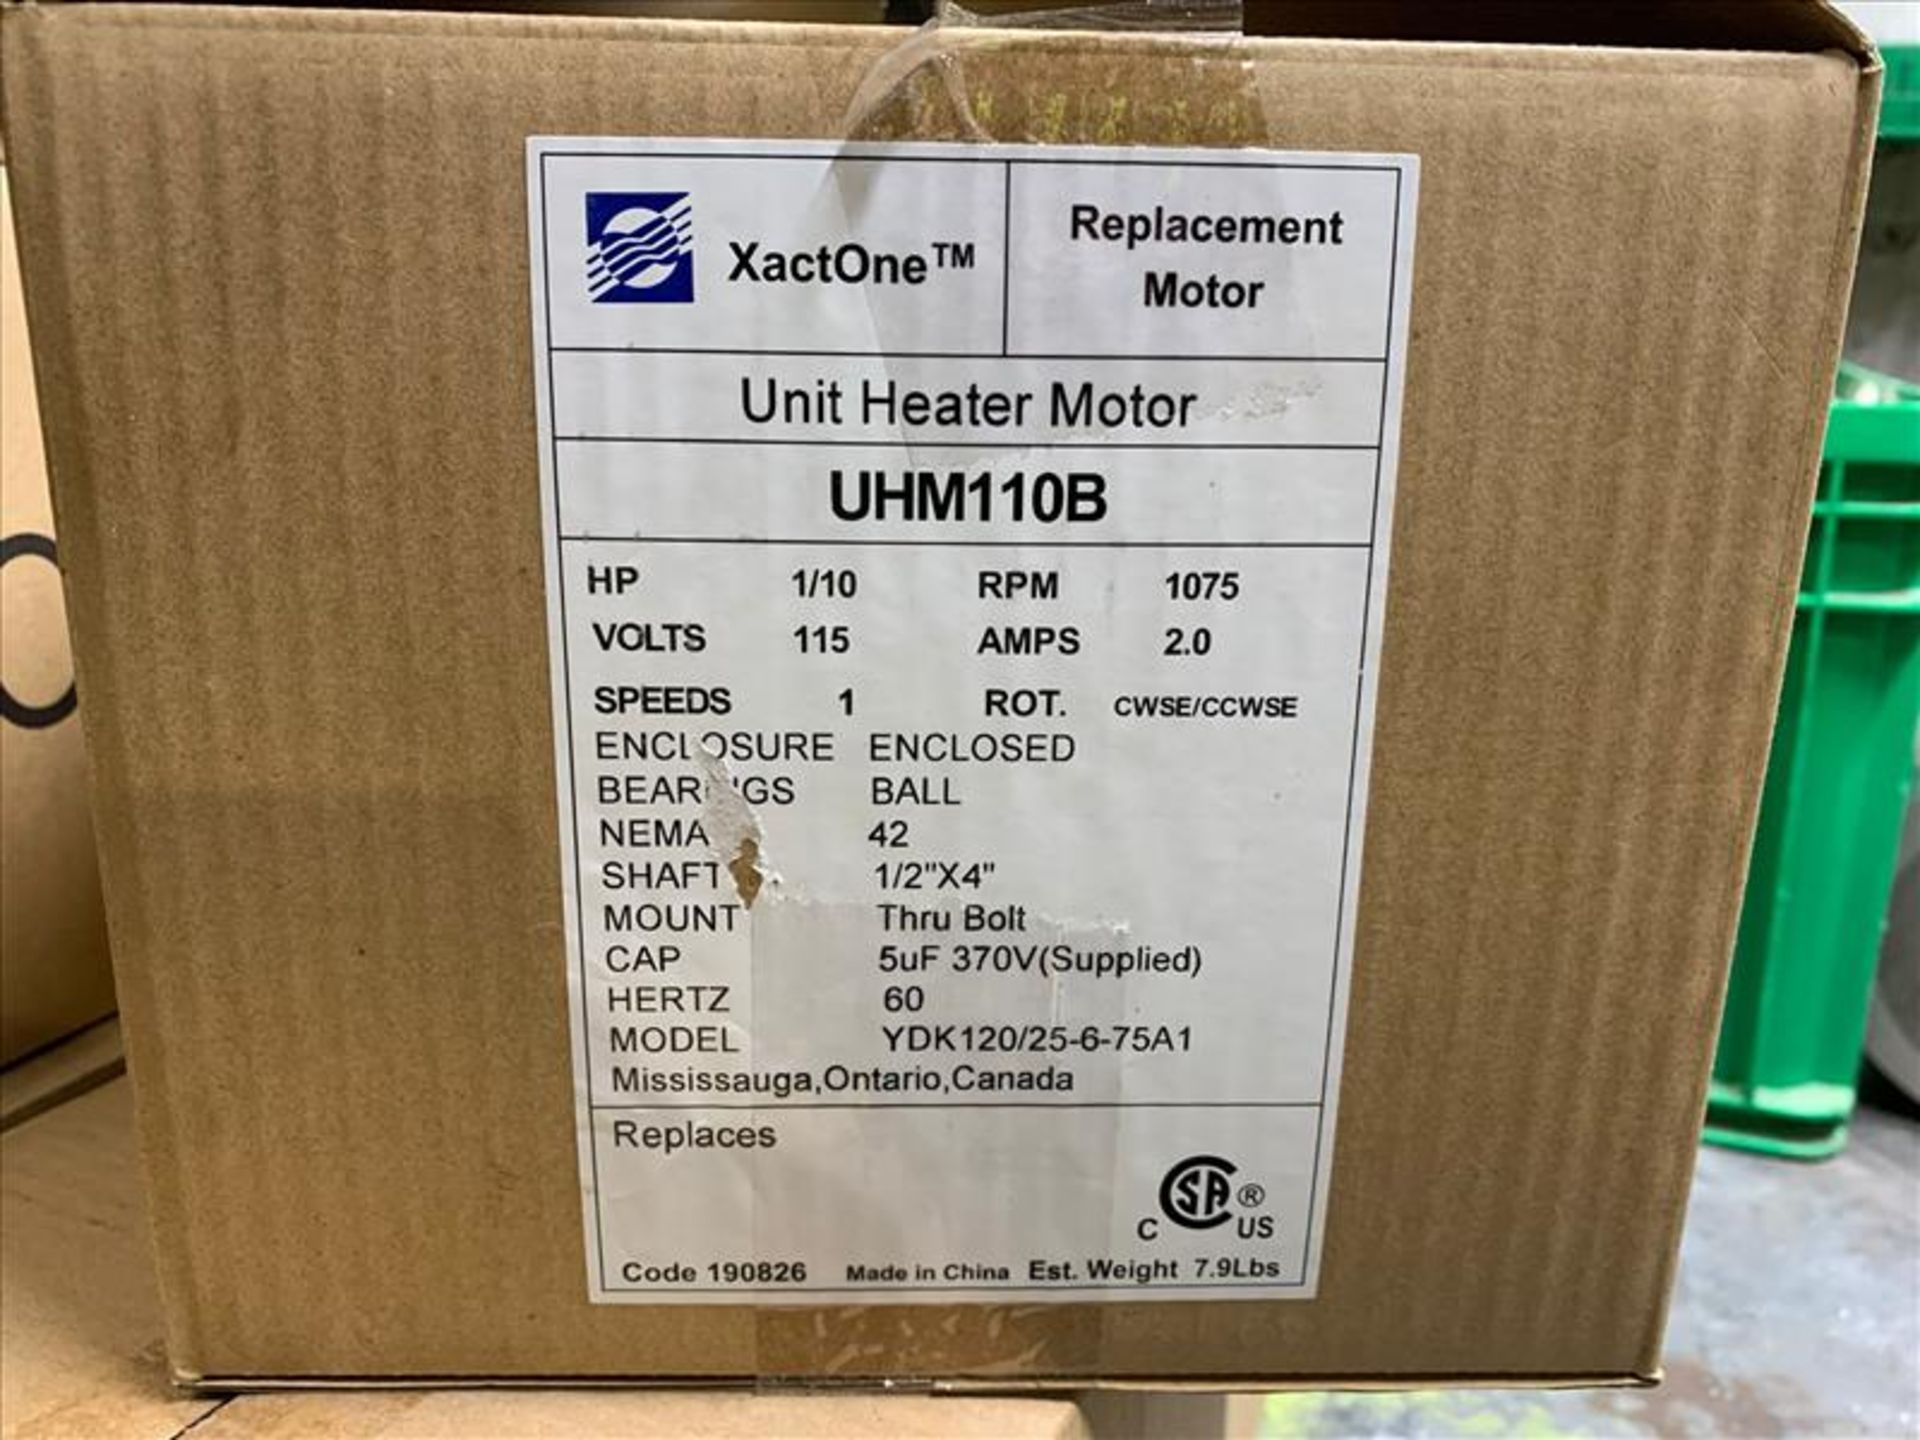 Xact One Unit Heater Motor, model YDK120/25-6-75A1, 1/10 hp - Image 3 of 3